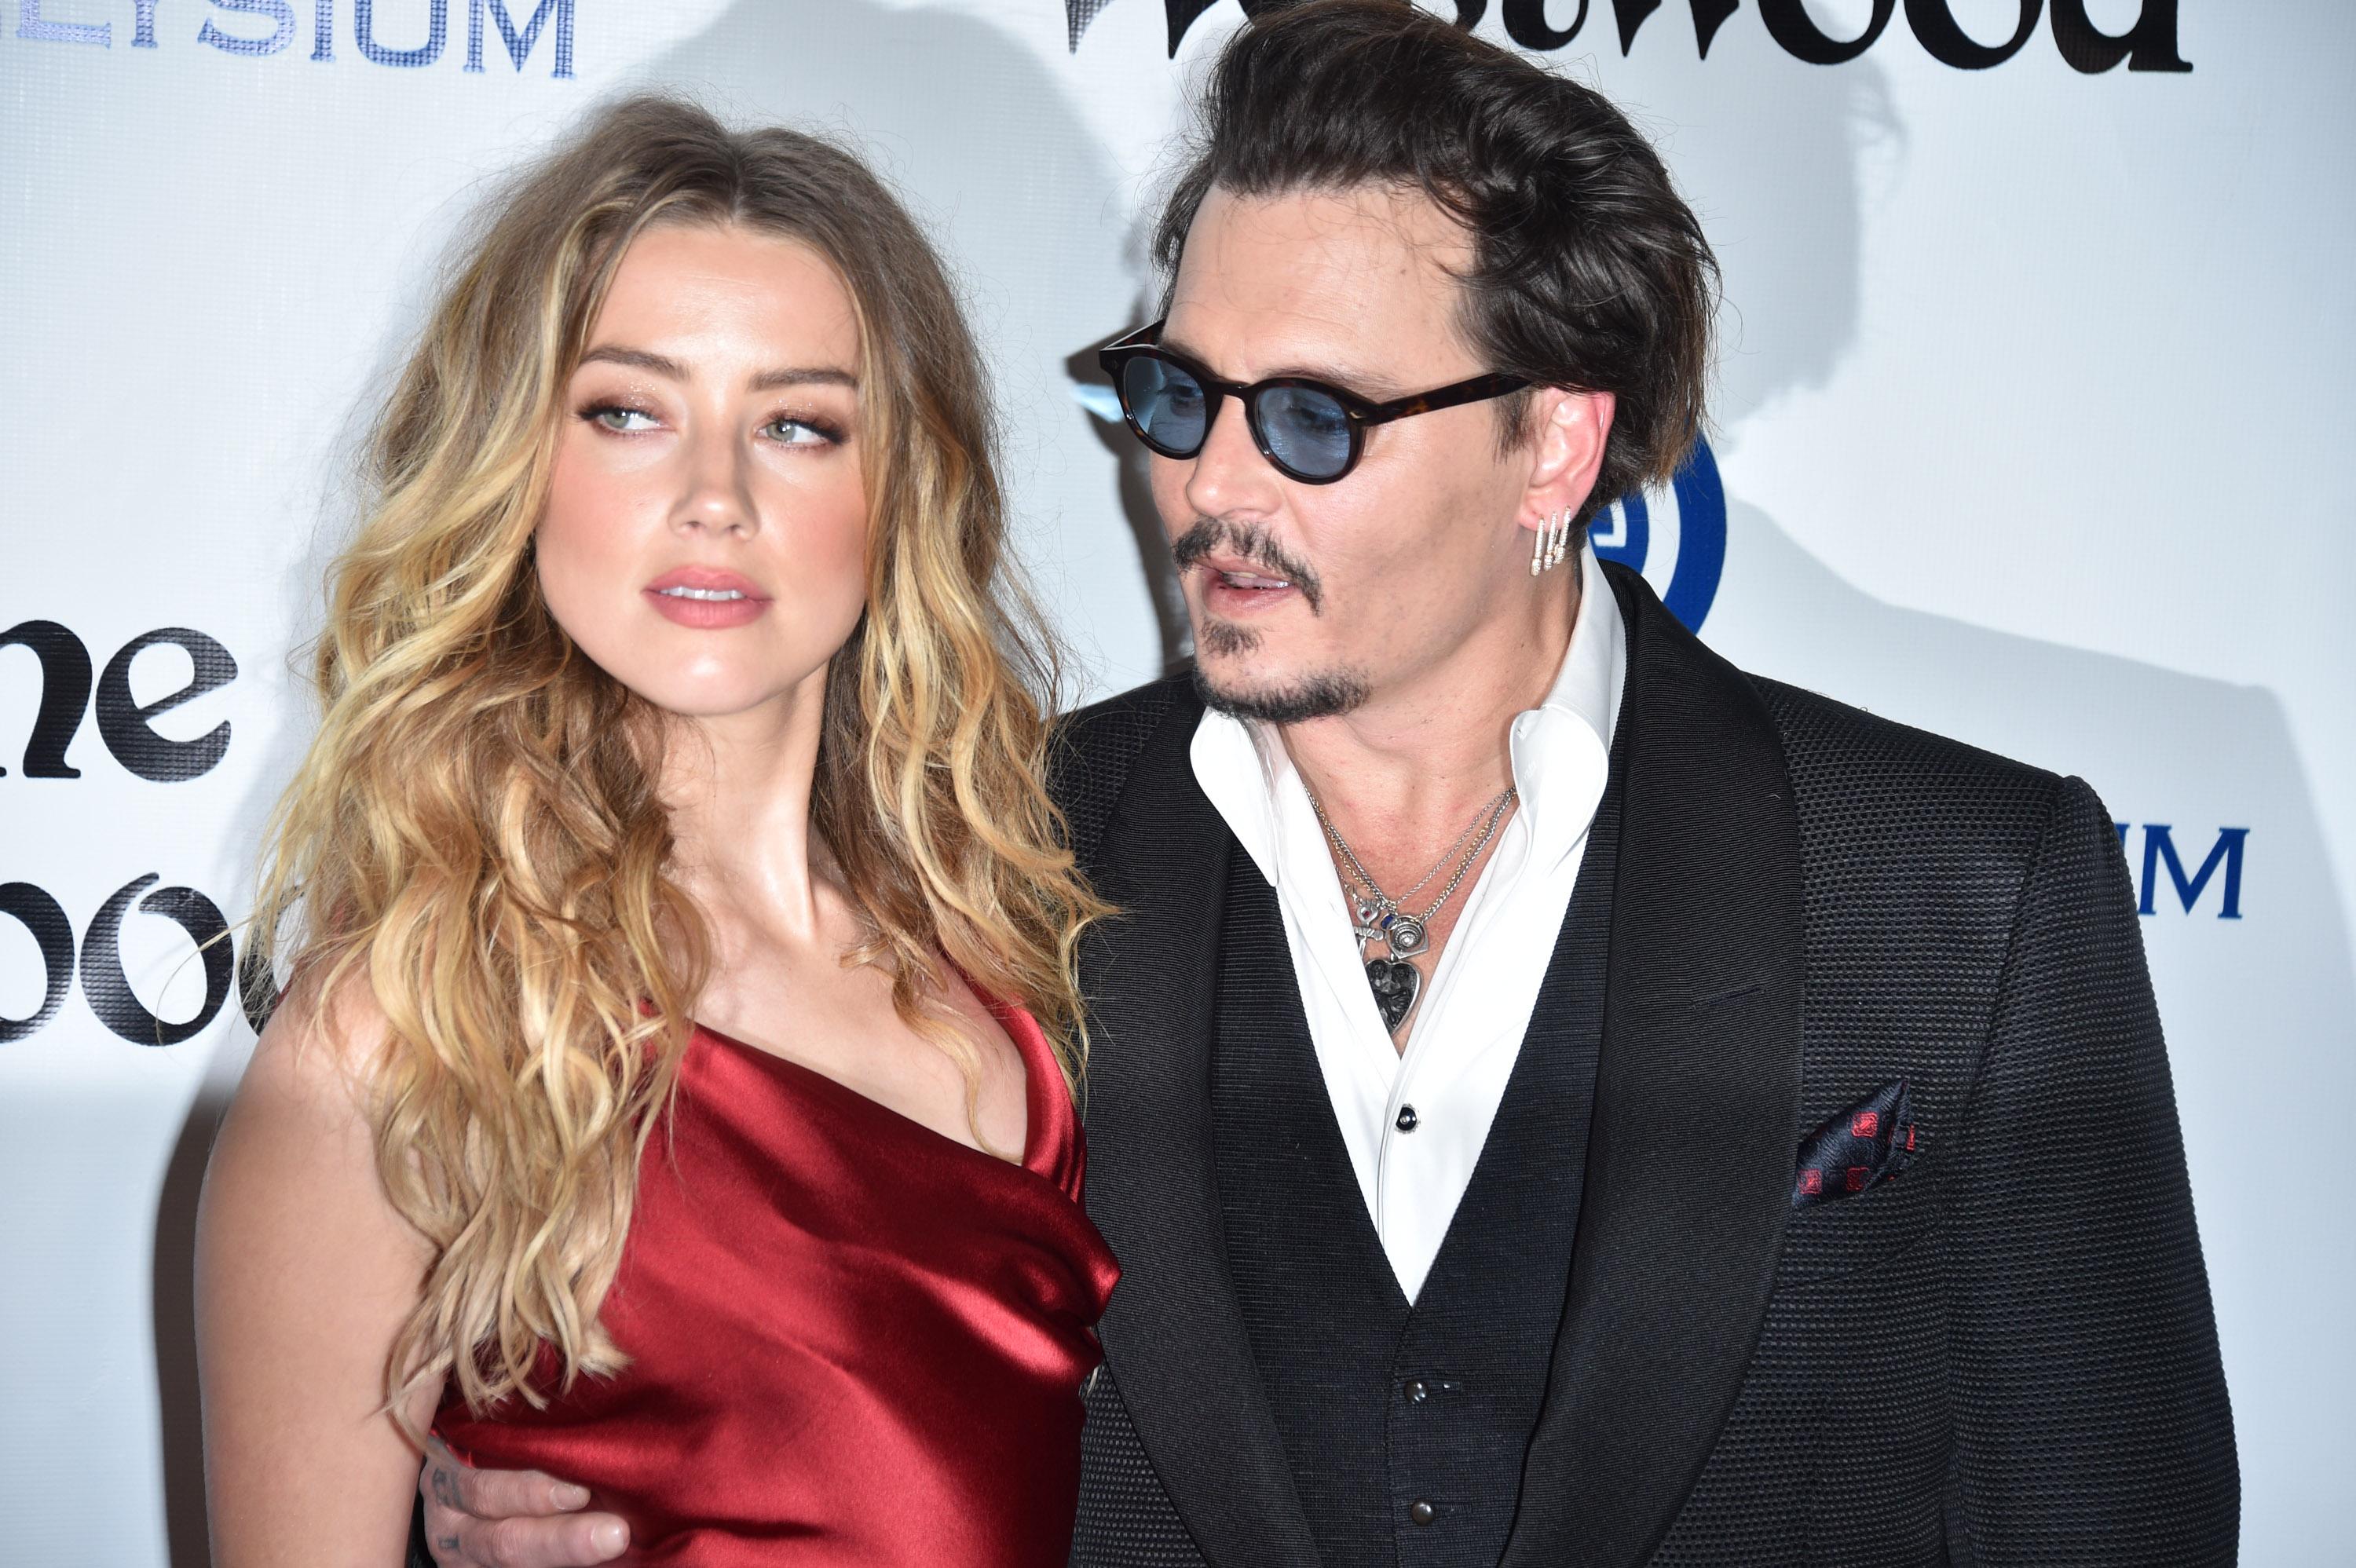 Amber Heard Granted Access To Records Involving Johnny Depp’s Drug And Alcohol Abuse